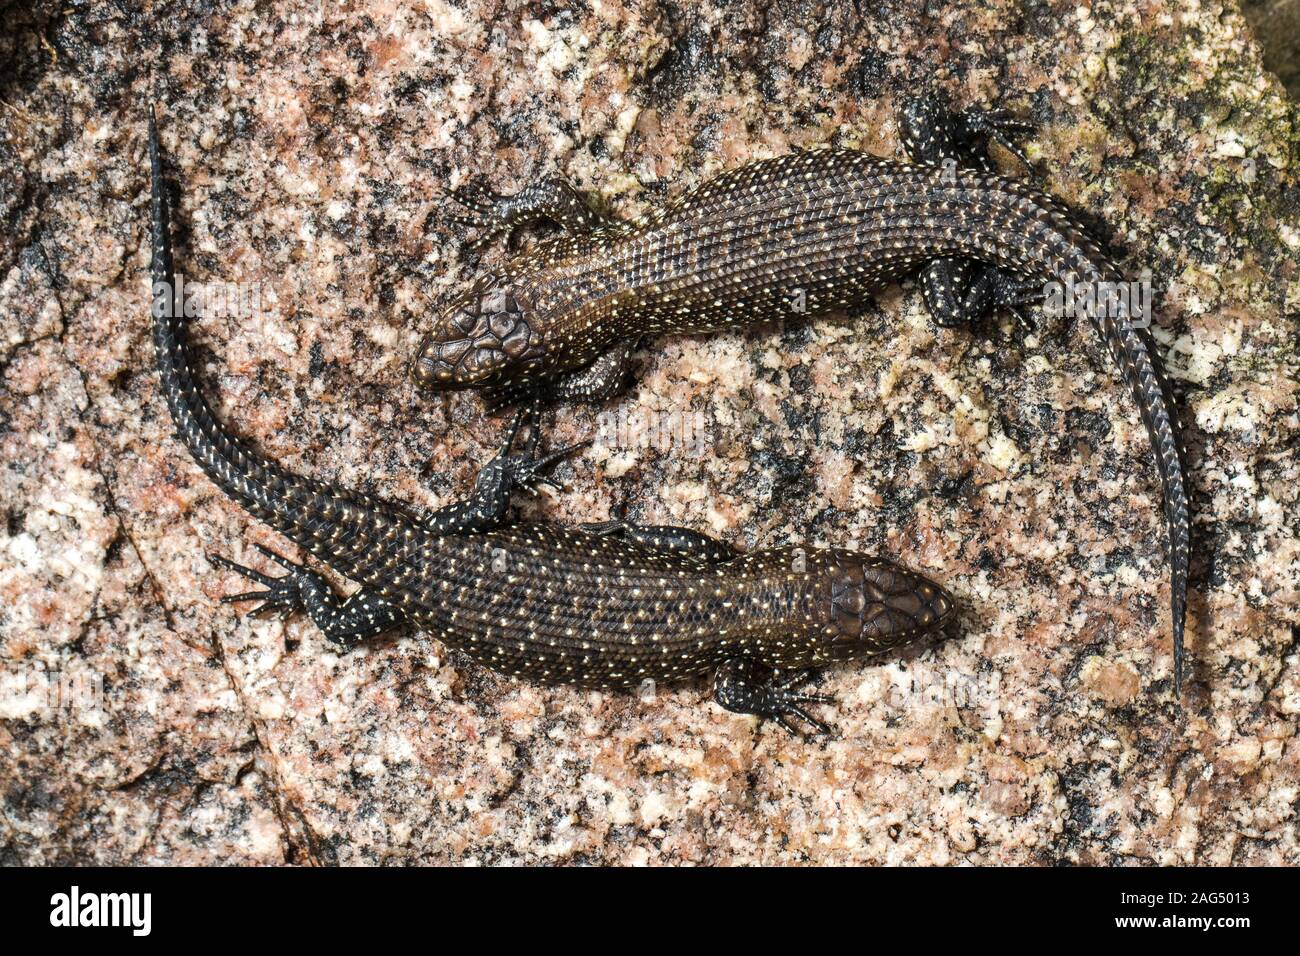 Juvenile Cunningham's Rock Skinks on rock showing camouflage coloration Stock Photo